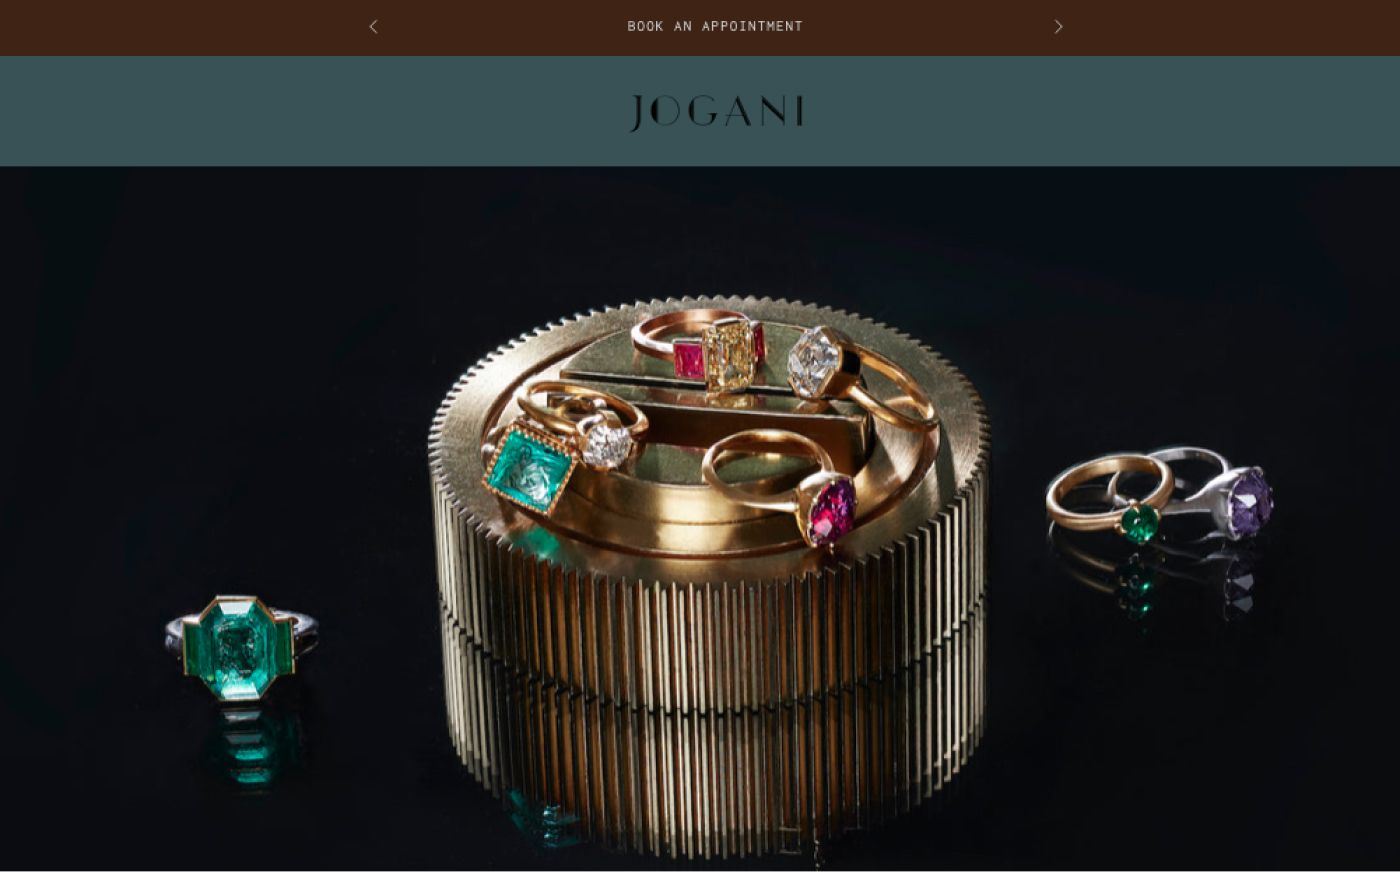 The Jogani website is a destination for rare and unusual jewels